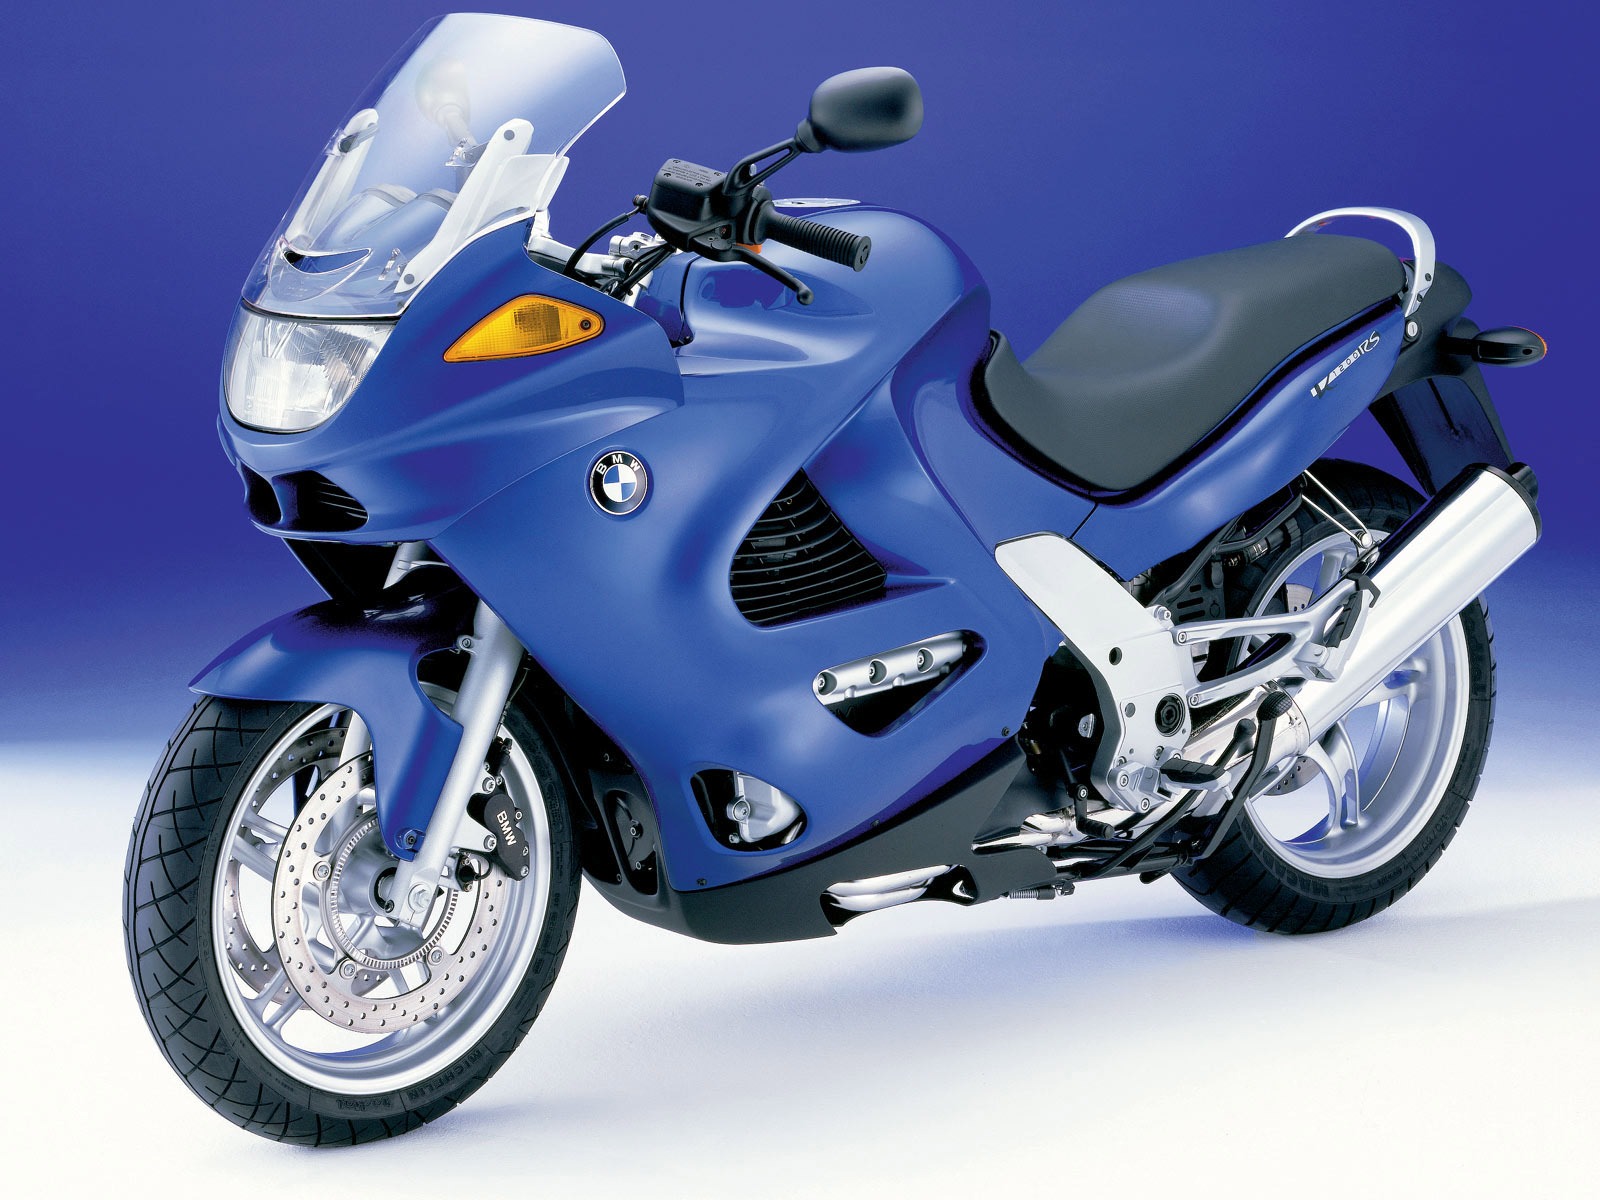 BMW motorcycle wallpapers (1) #2 - 1600x1200